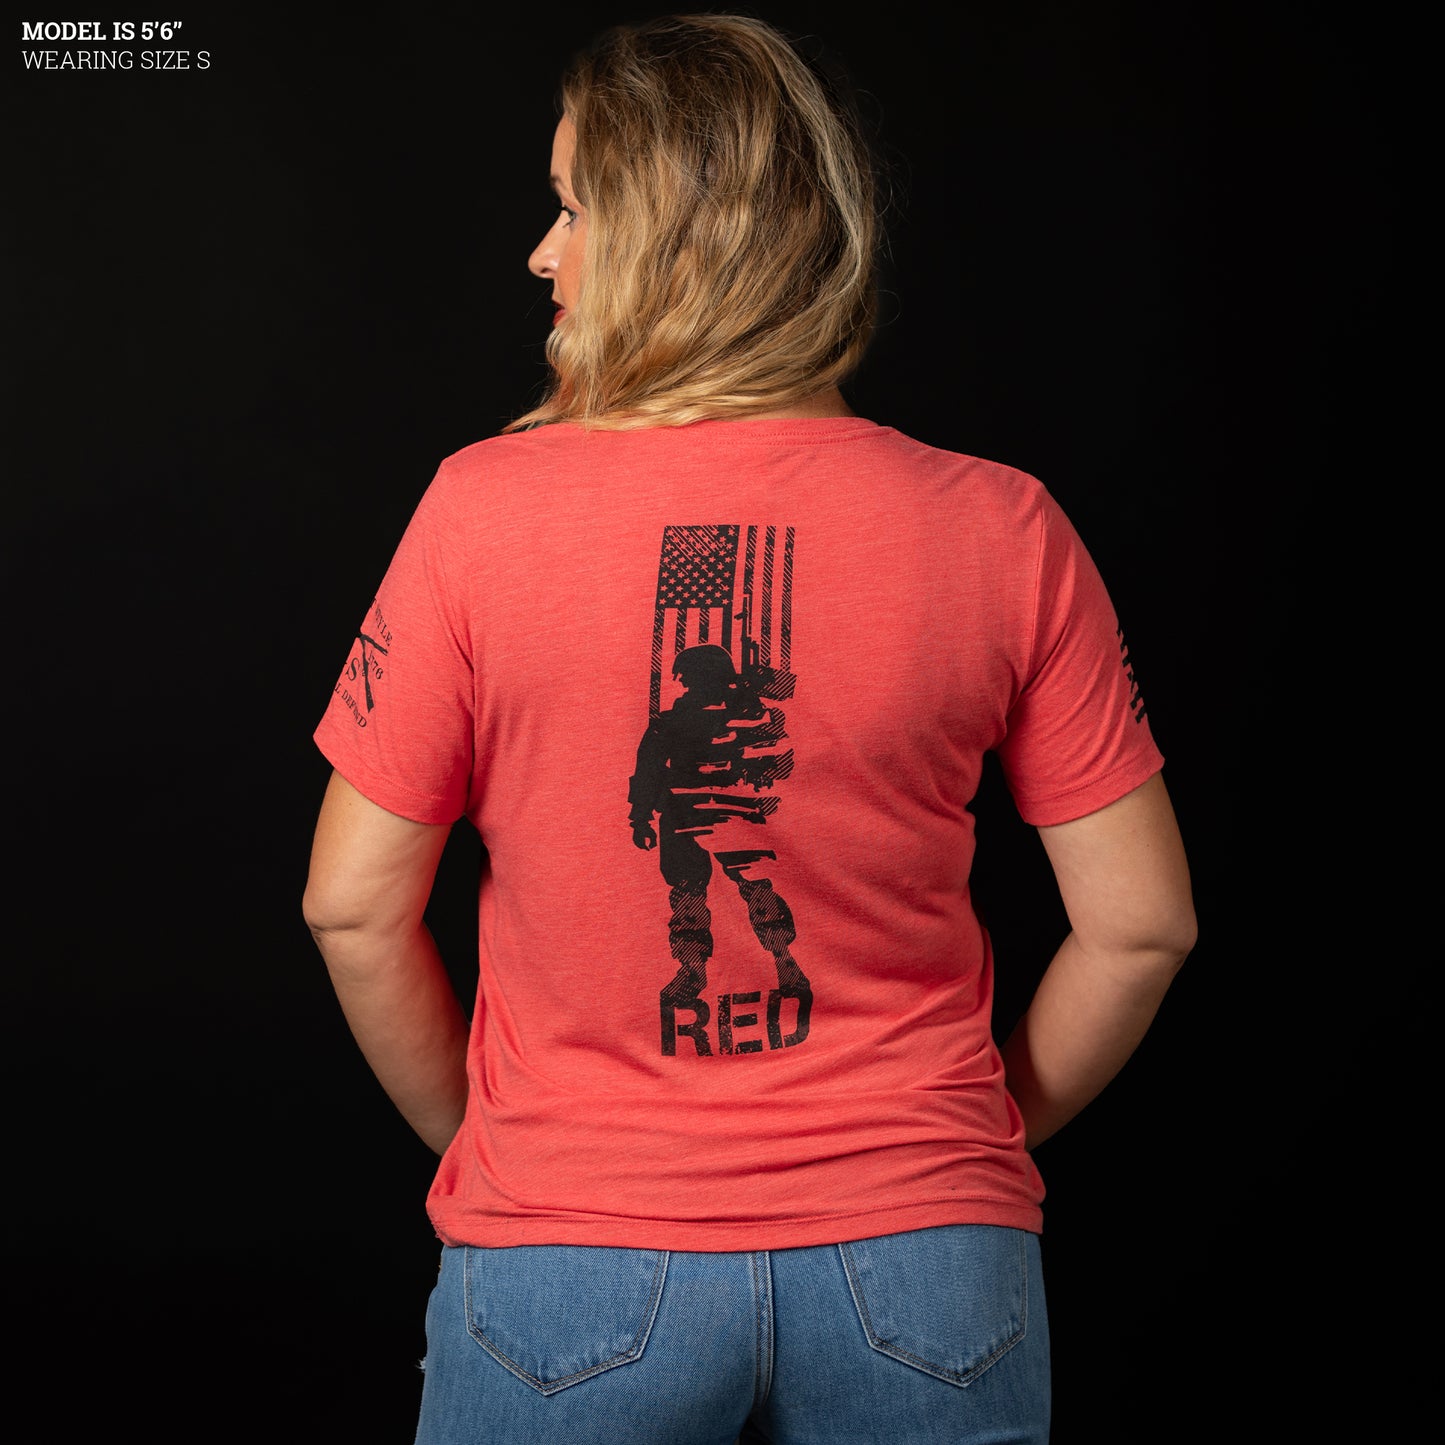 RED Friday Shirt for Women